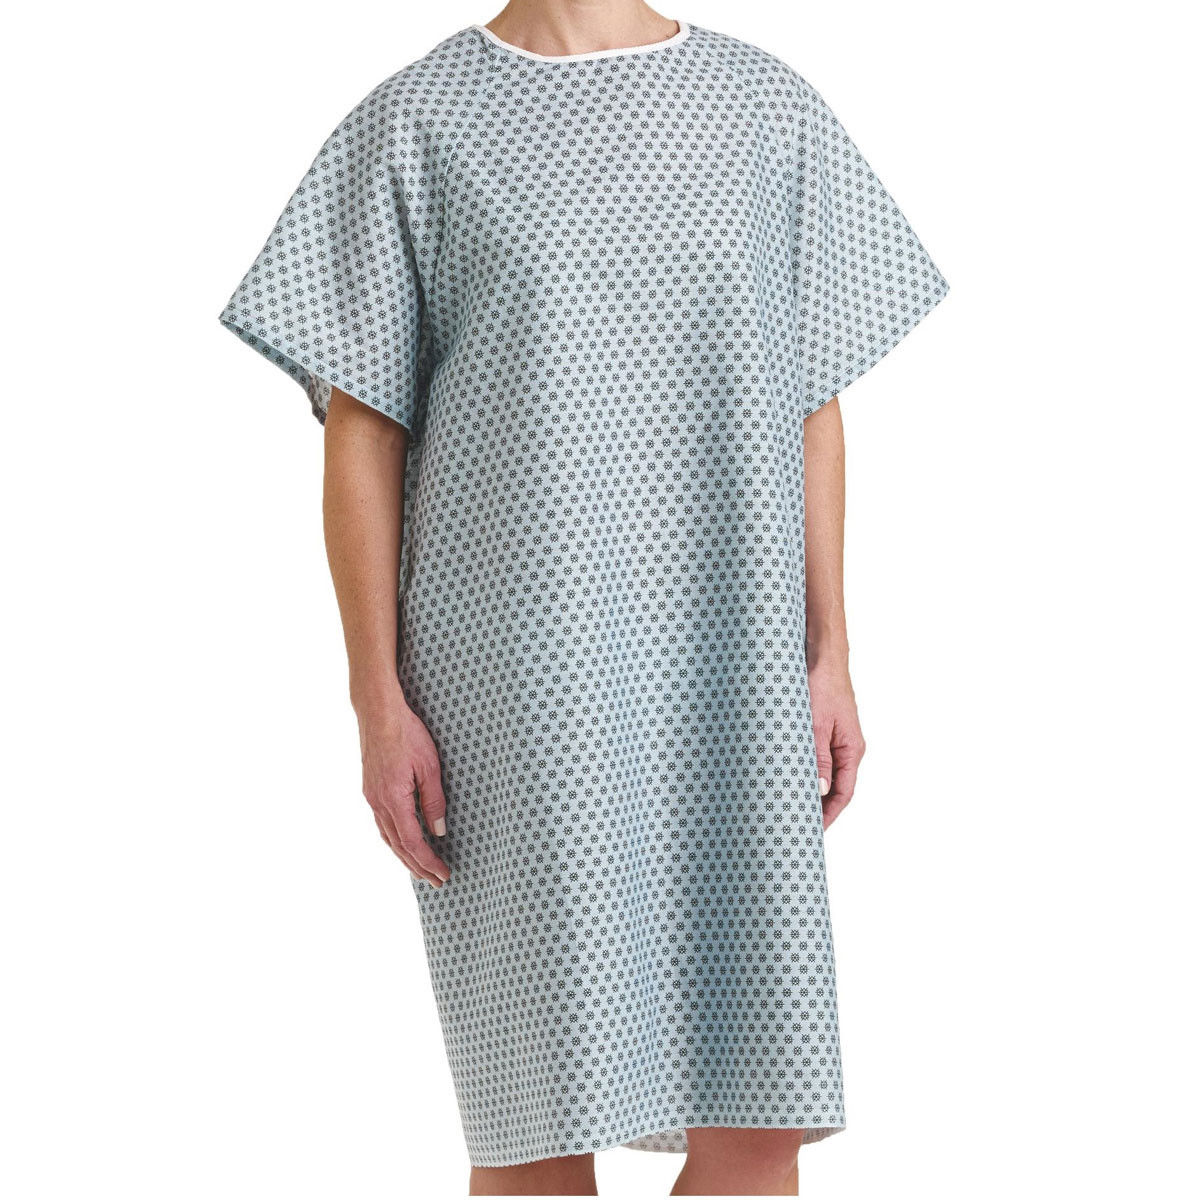 Do you sell children's hospital gowns?